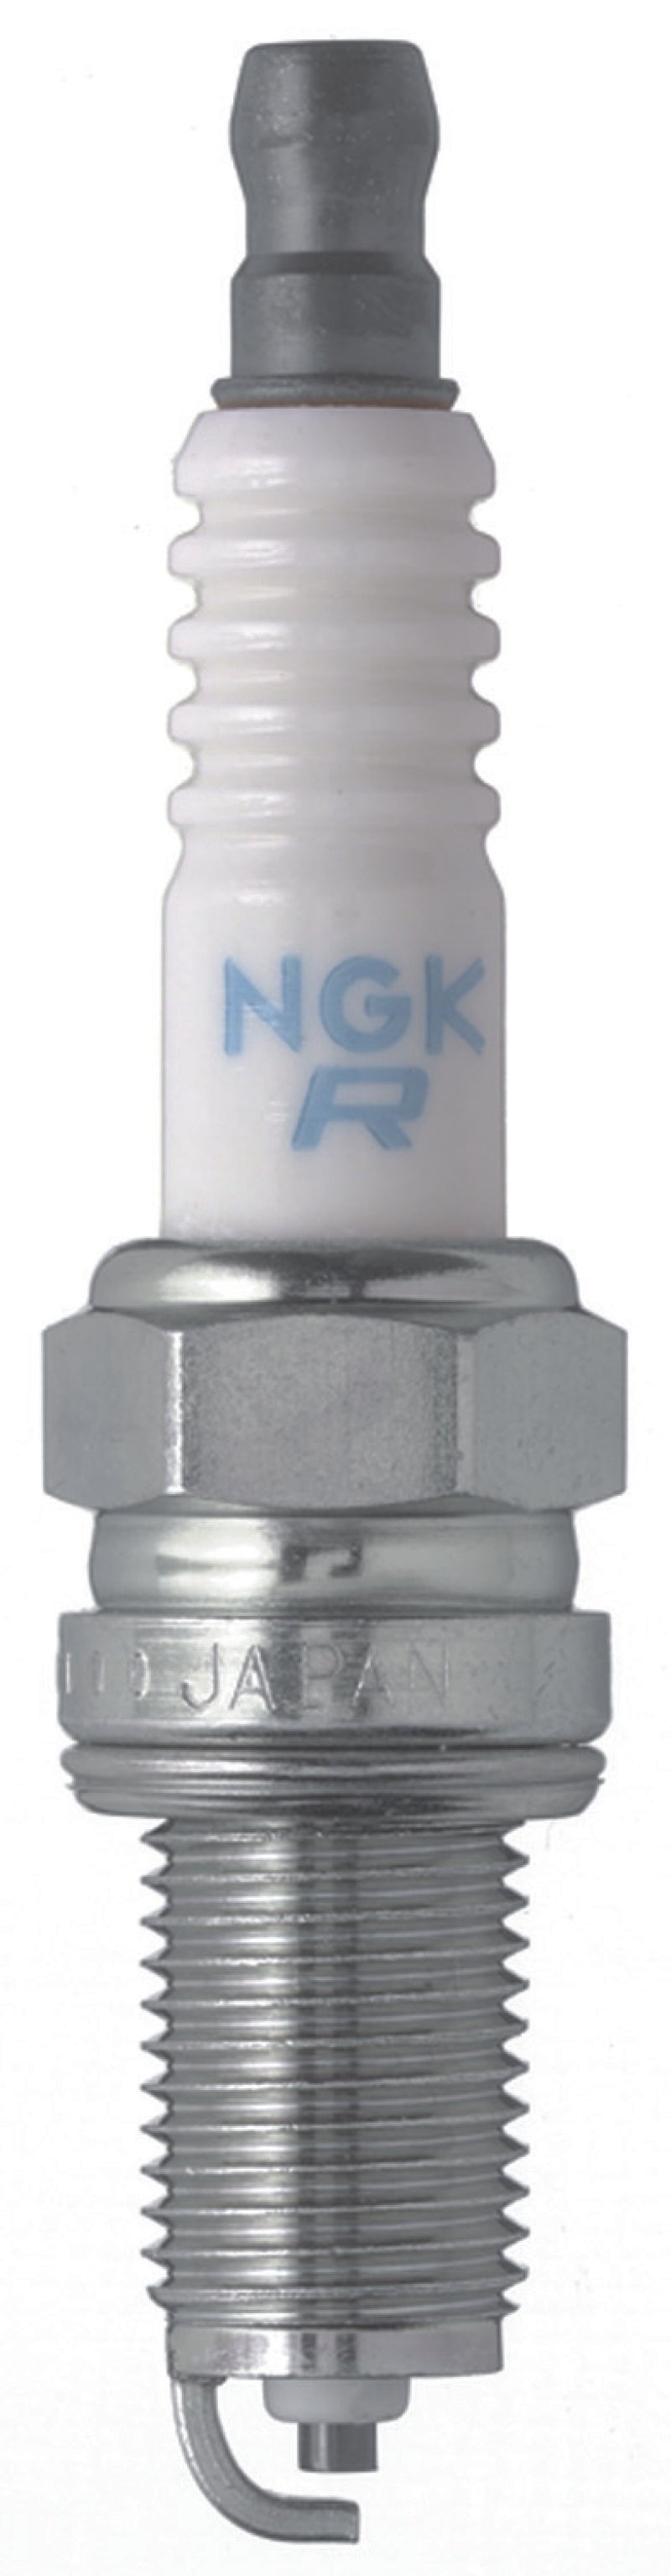 NGK Standard Spark Plug Box of 4 (DCPR6E) -  Shop now at Performance Car Parts